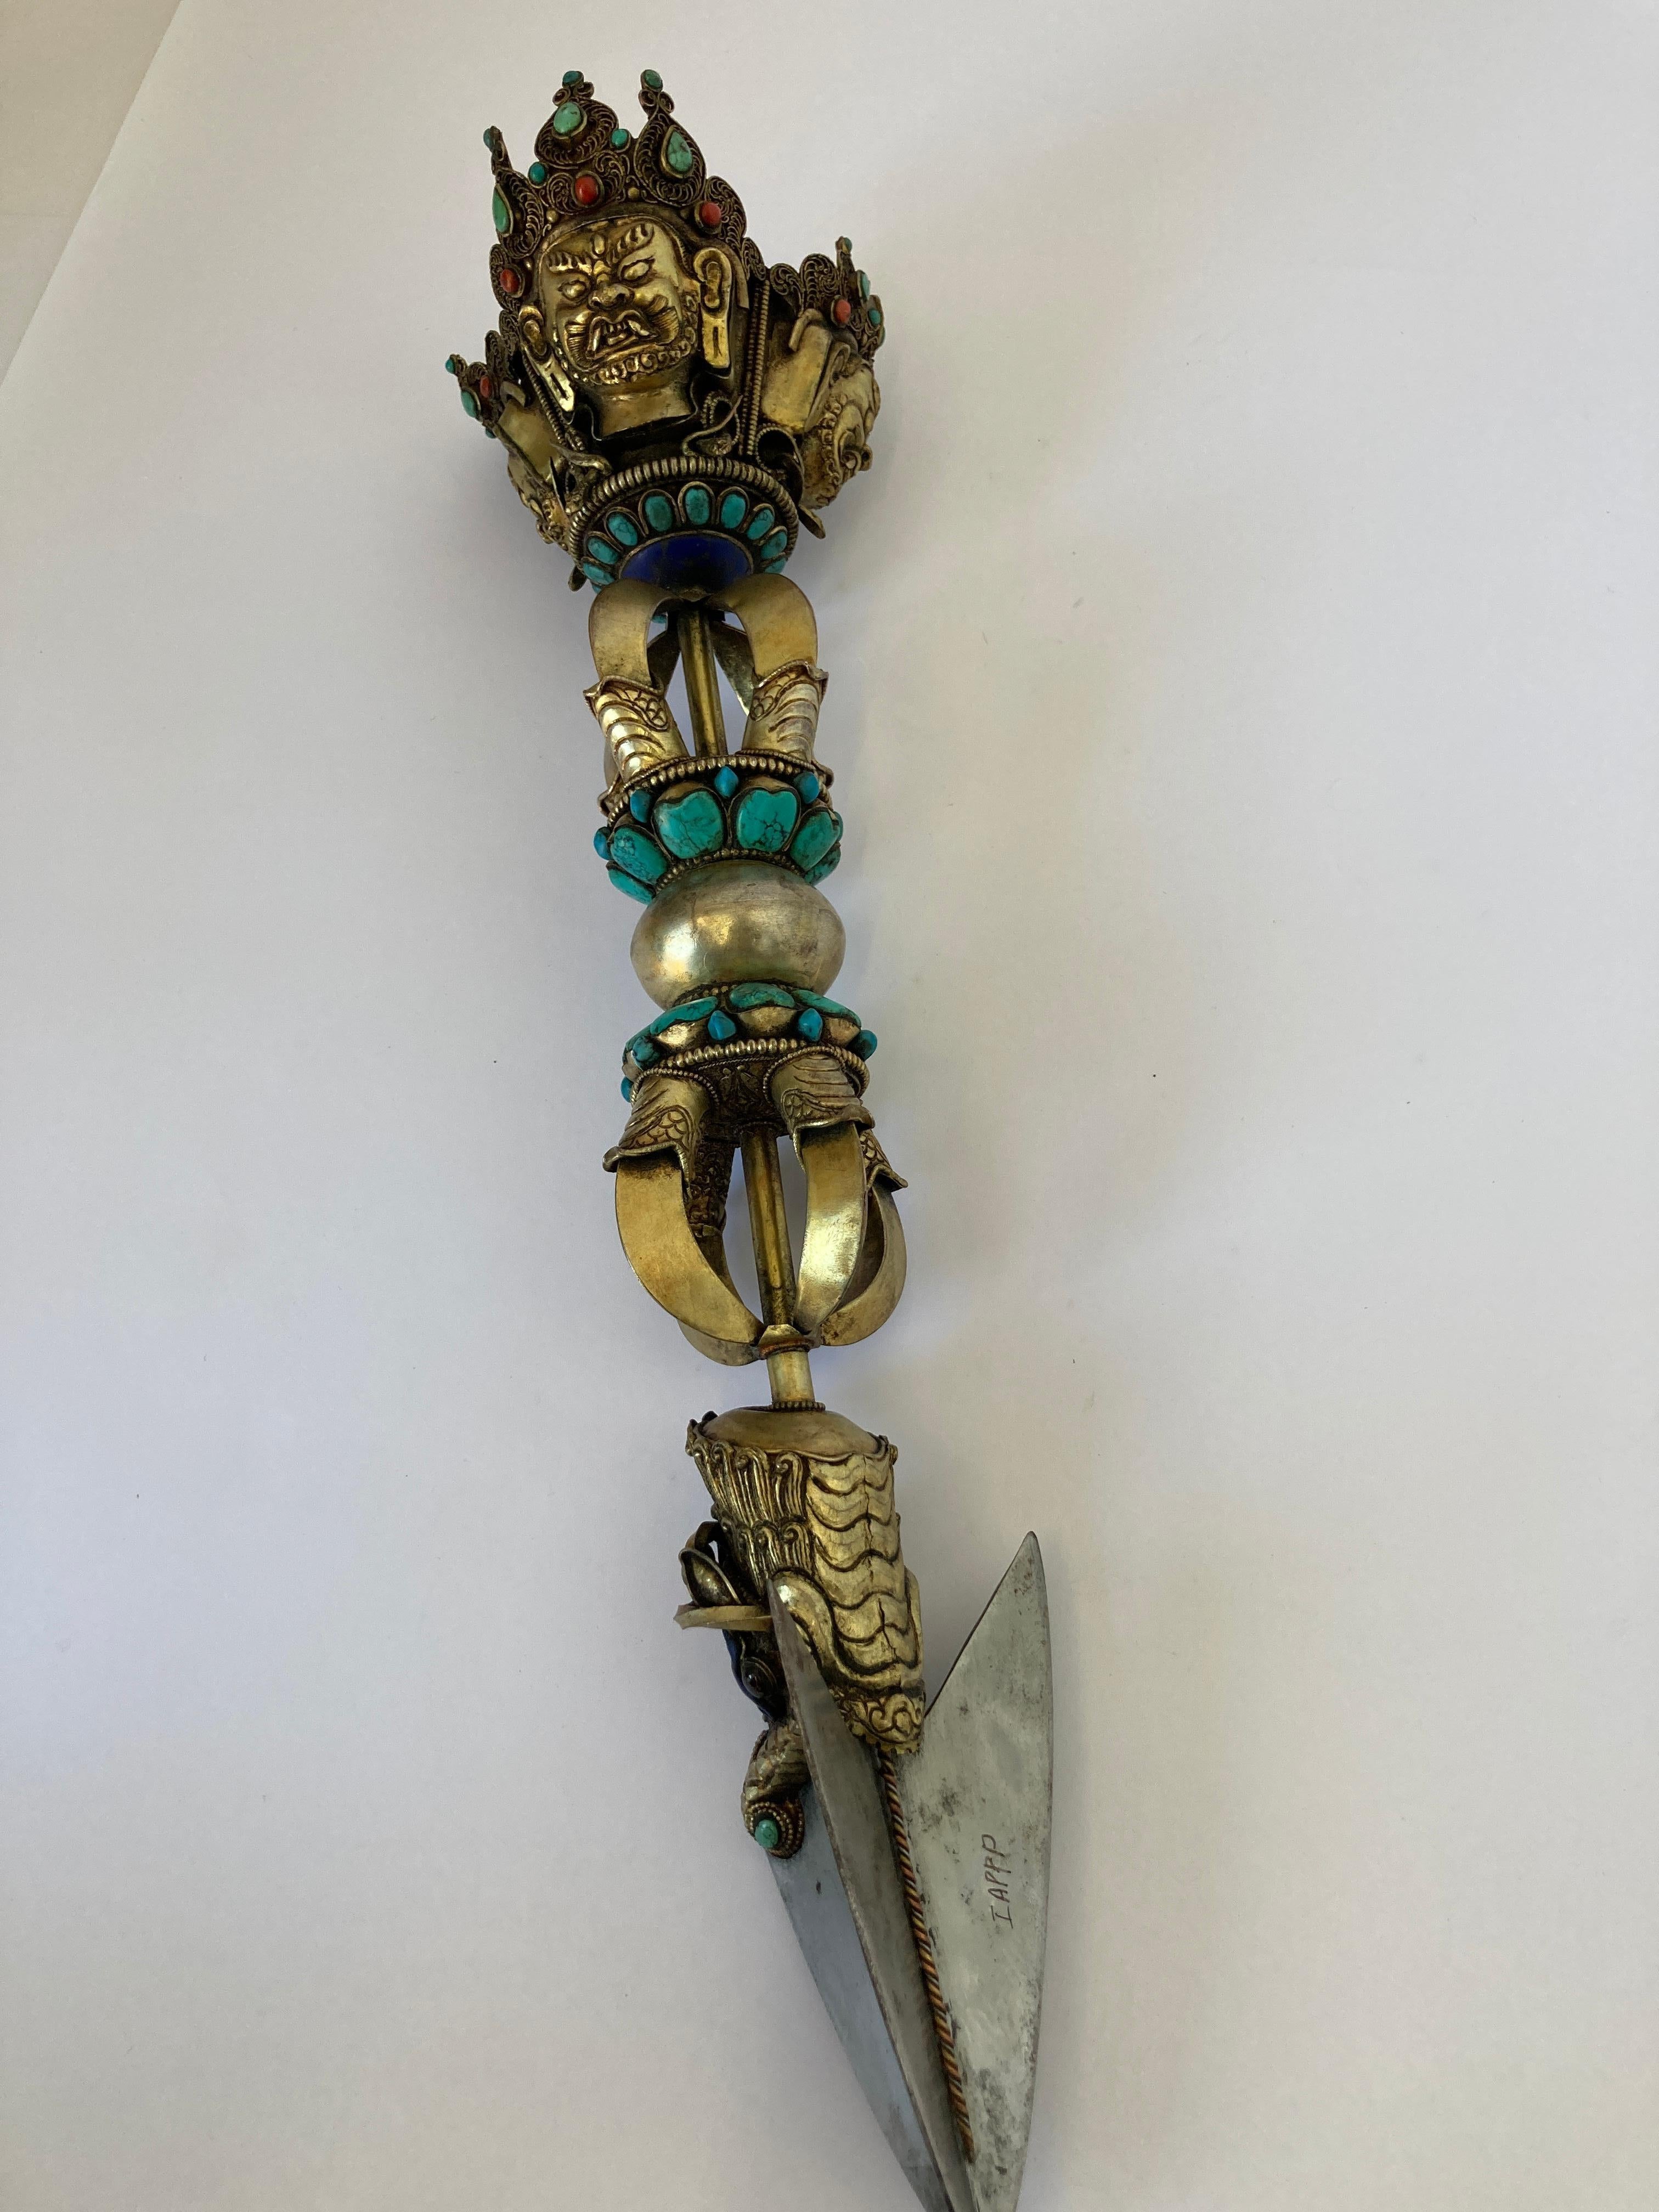 Large Phurba ornate with semi precious stones, like turquoise and red stones incrusted in brass metal.
The Phurba or Kila: the most potent of wrathful ritual implements in Vajrayana Buddhism, symbolizes the Karma activity of the Buddhas.
Contrary